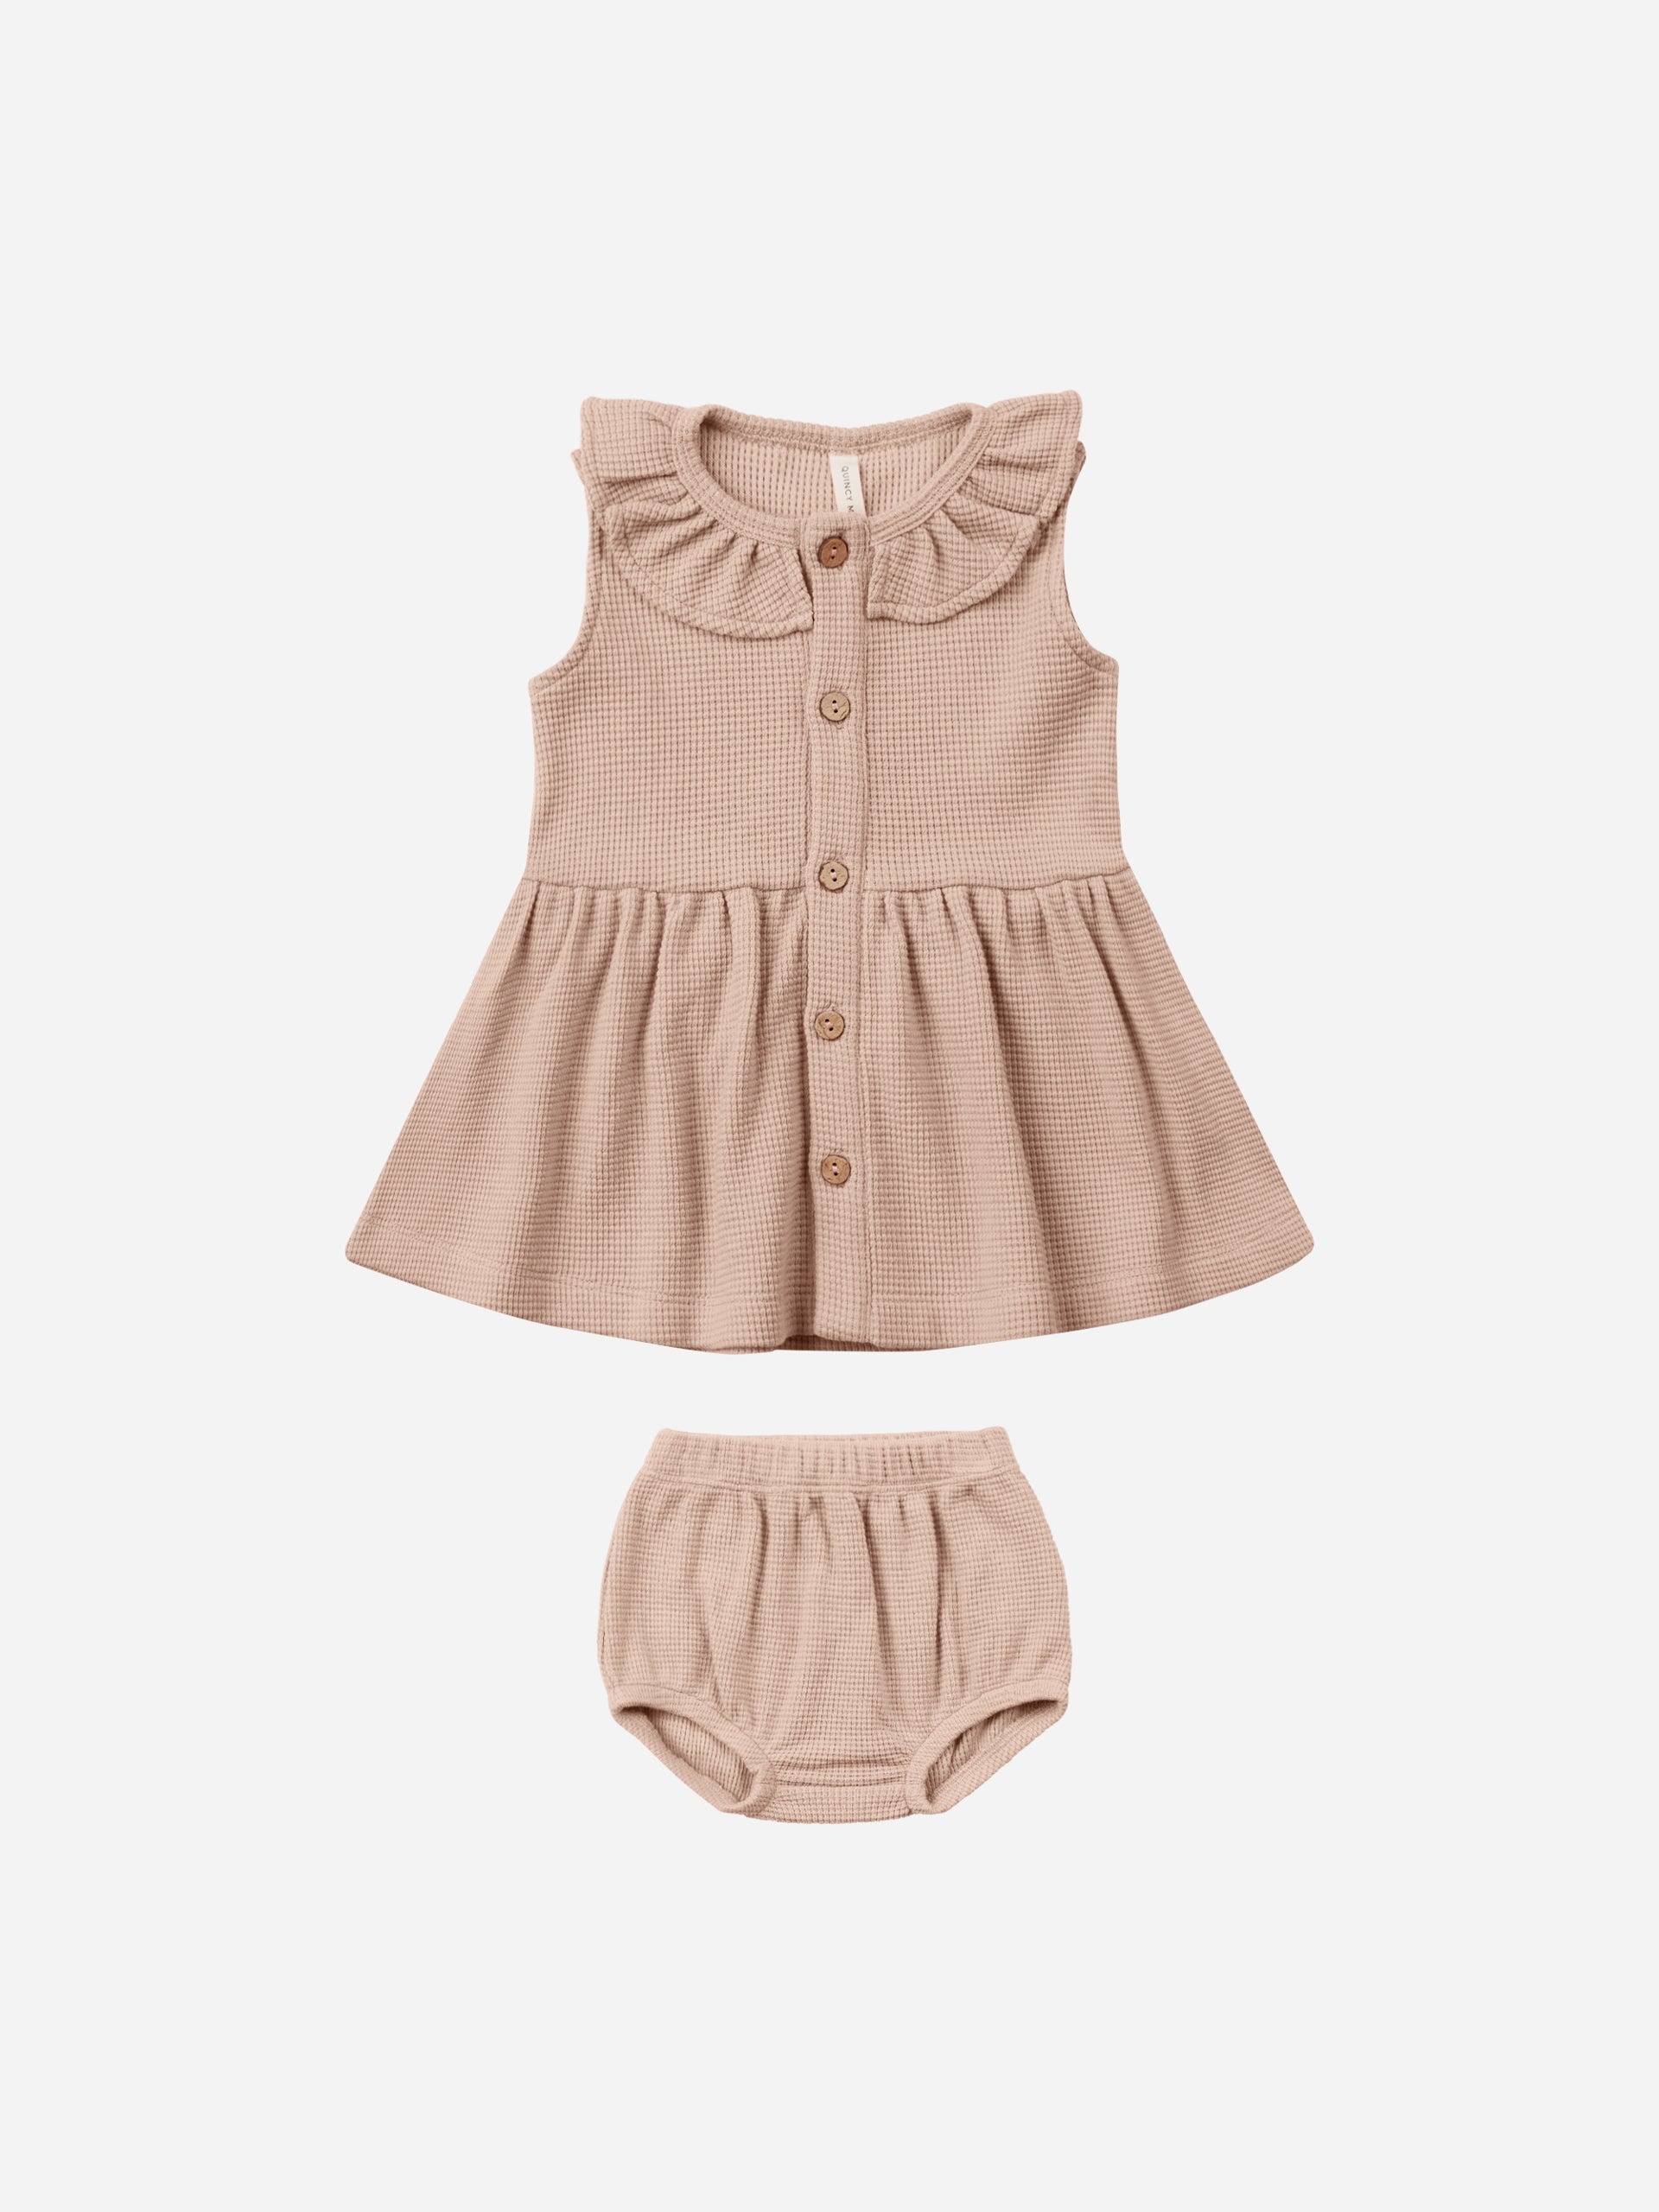 Rue Tank Dress || Blush - Rylee + Cru | Kids Clothes | Trendy Baby Clothes | Modern Infant Outfits |